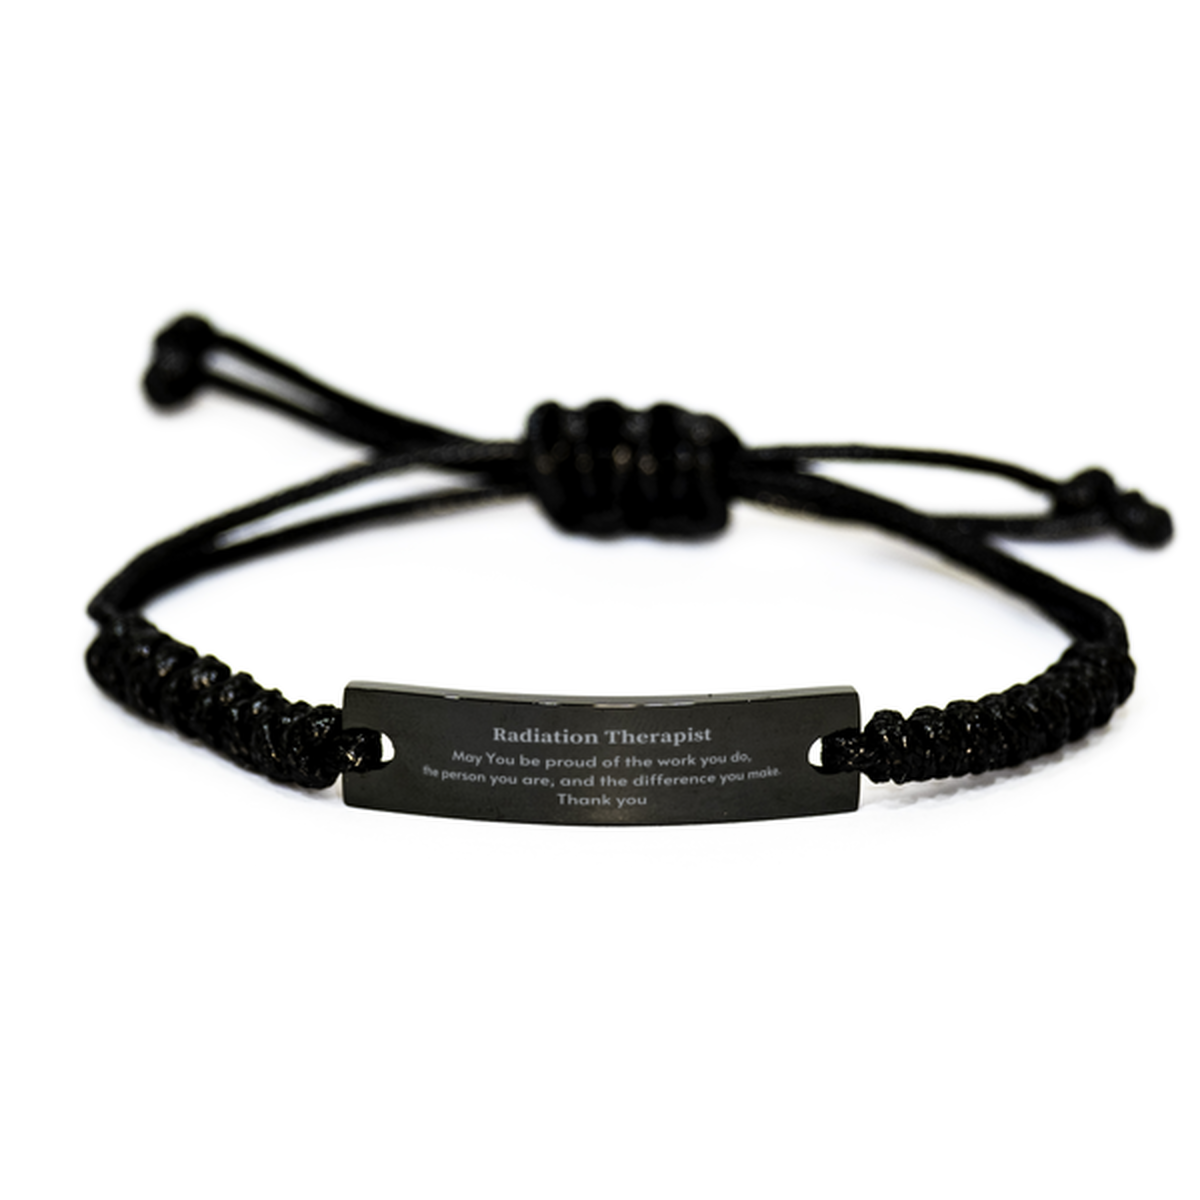 Heartwarming Black Rope Bracelet Retirement Coworkers Gifts for Radiation Therapist, Radiation Therapist May You be proud of the work you do, the person you are Gifts for Boss Men Women Friends